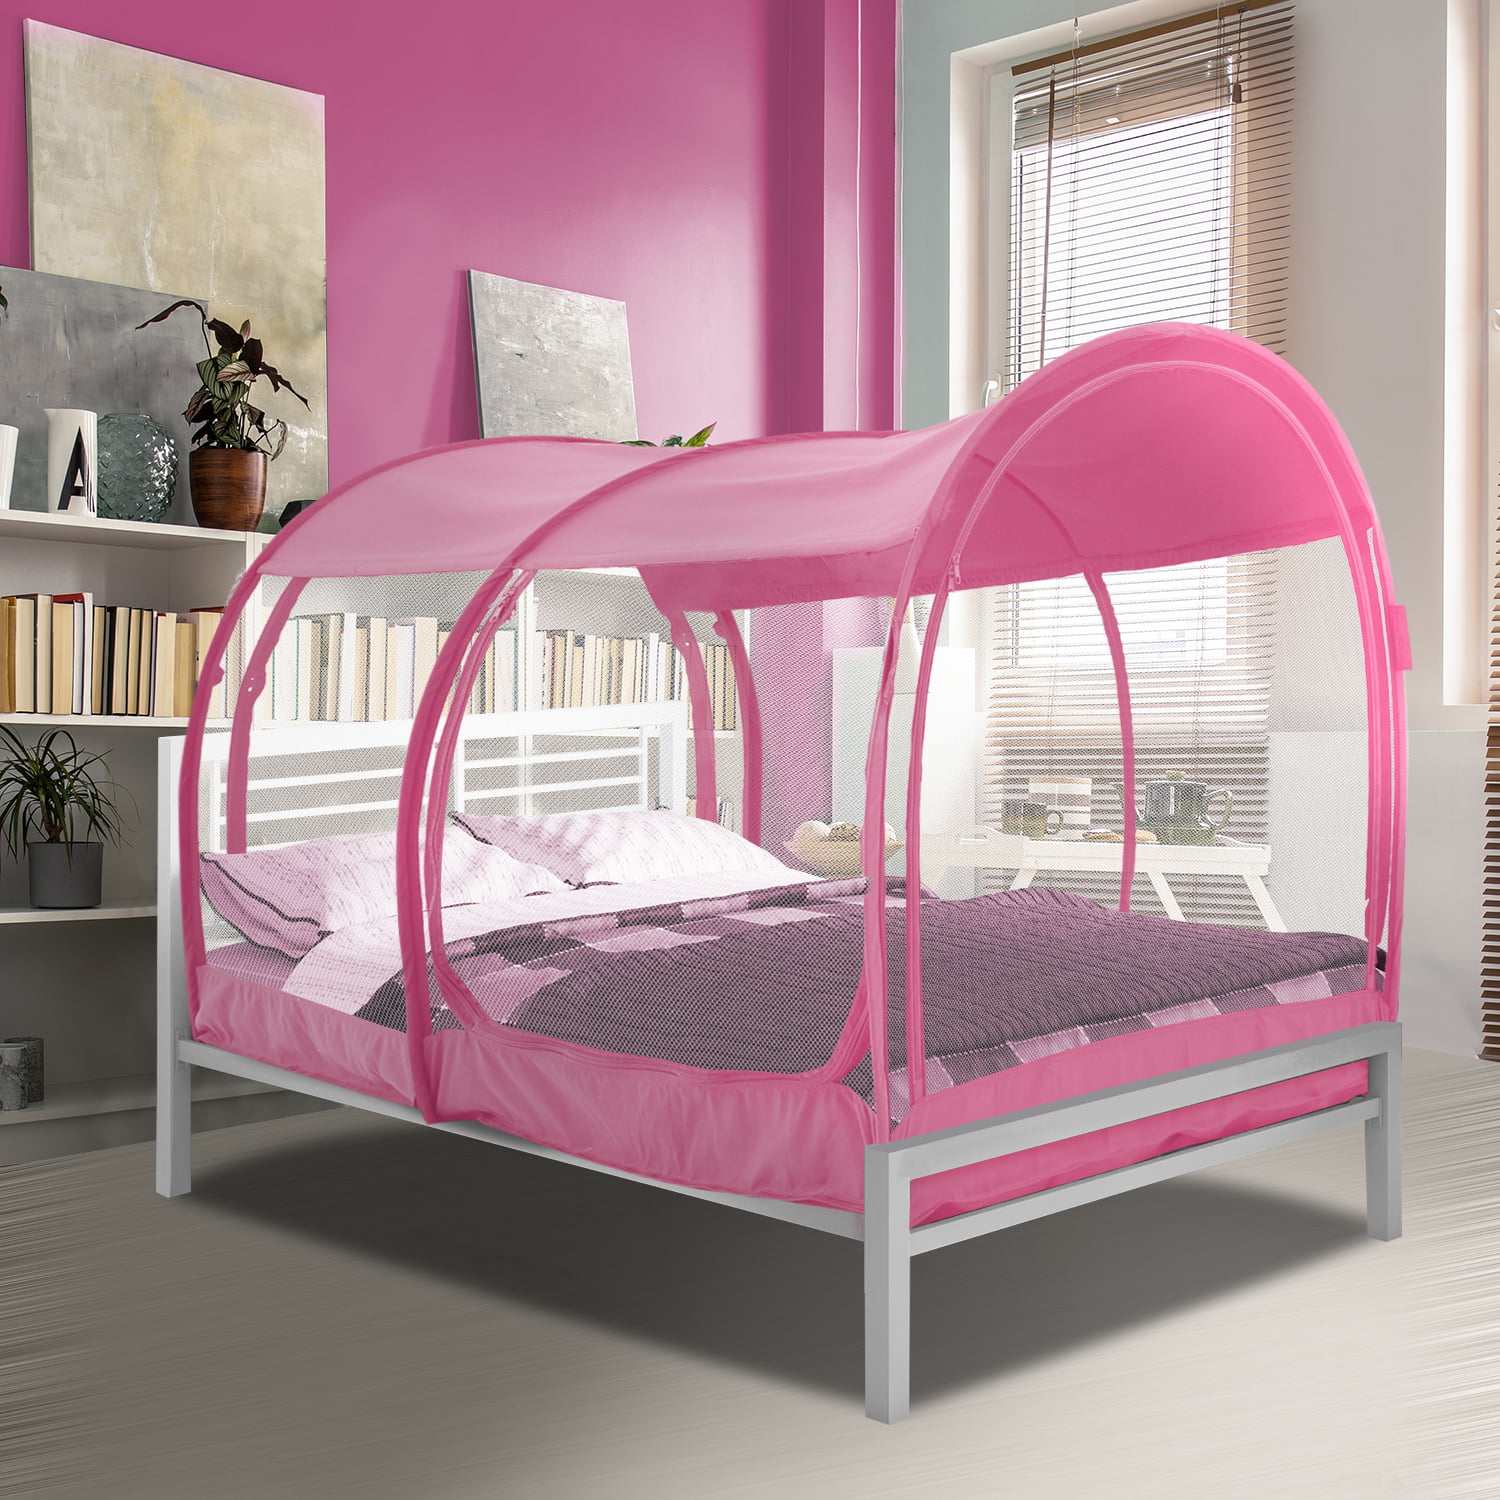 Bed Tent Mosquito Net Privacy Space, Bunk Bed Privacy Tent